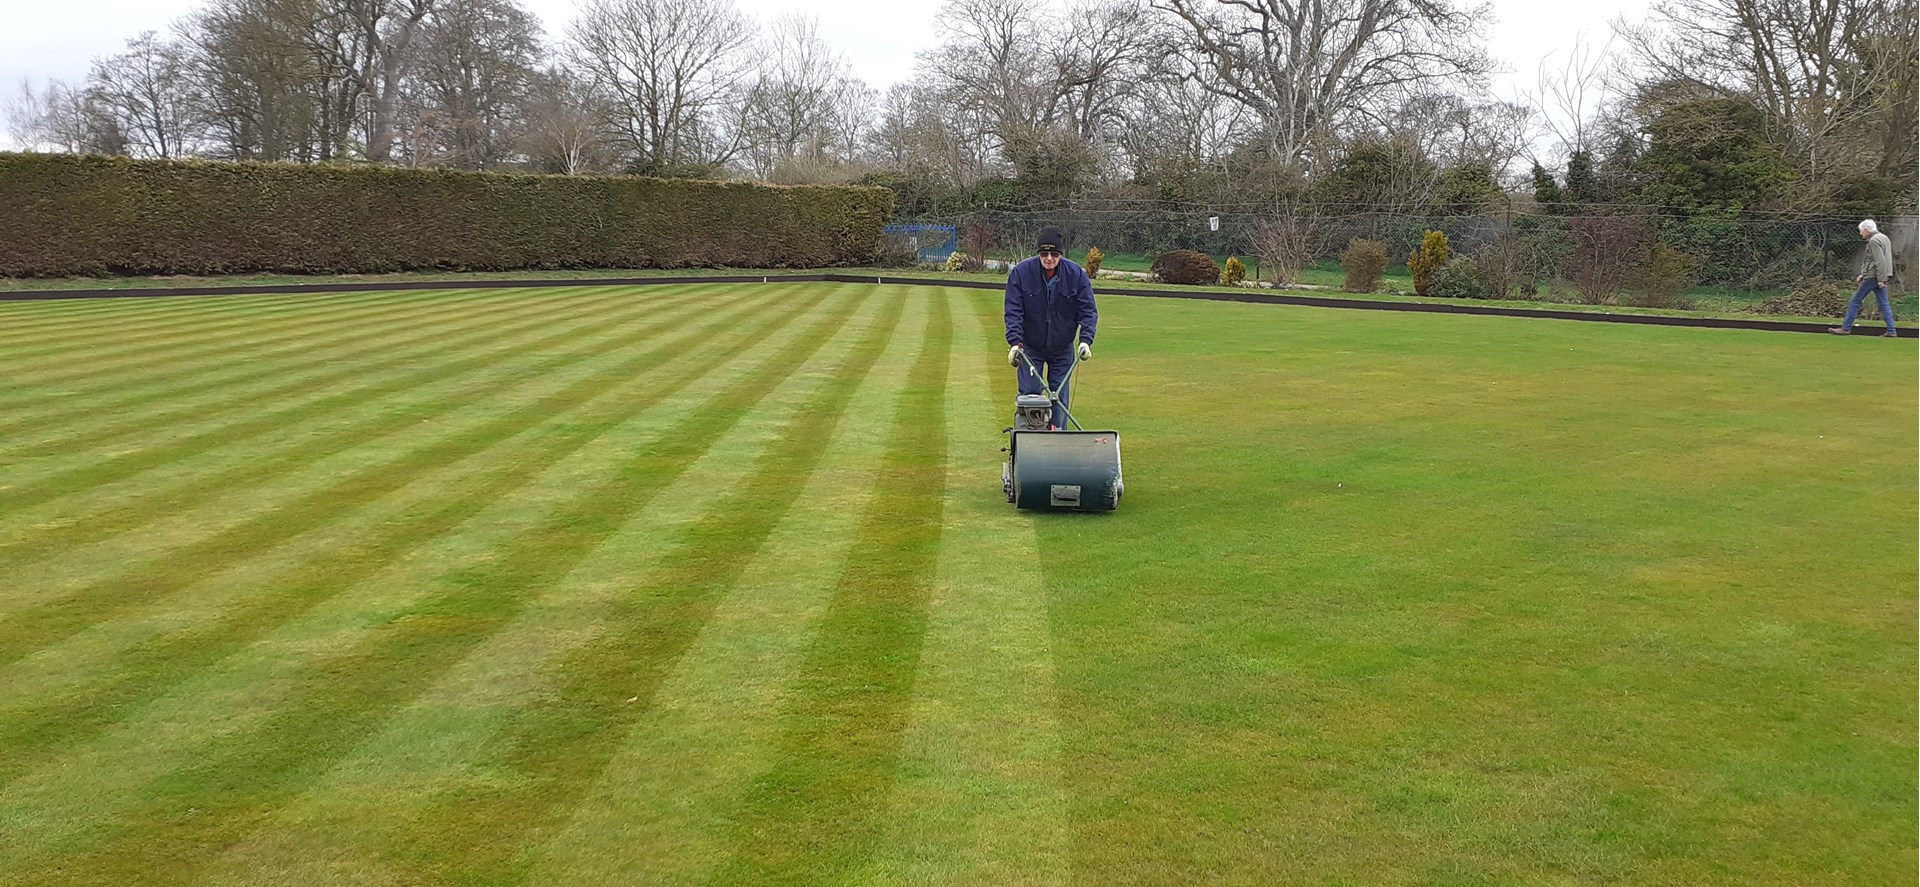 March 20th, 2023 - first cut of the year with the repaired mower!  Thanks for the photo, Bern.